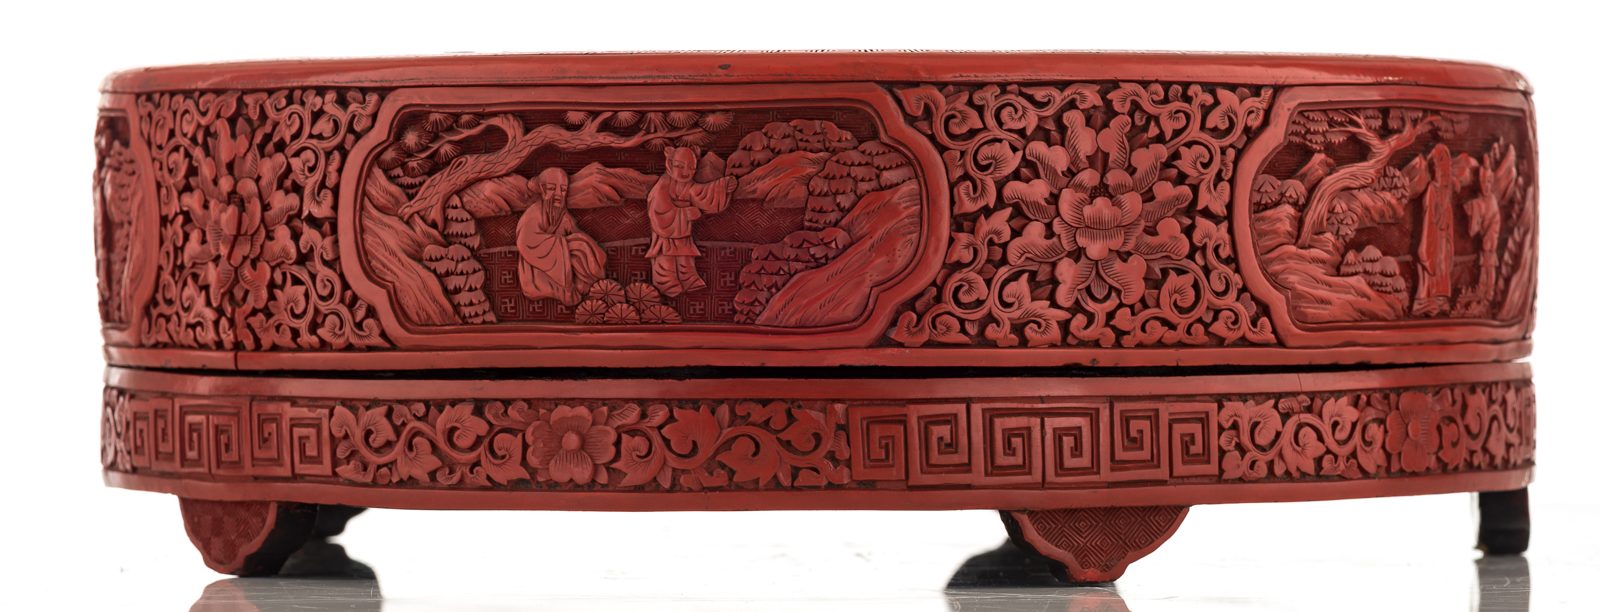 A Chinese Peking cinnabar lacquered sweetmeat box and cover, H 11,5 - ø 32,5 cm - Image 5 of 8